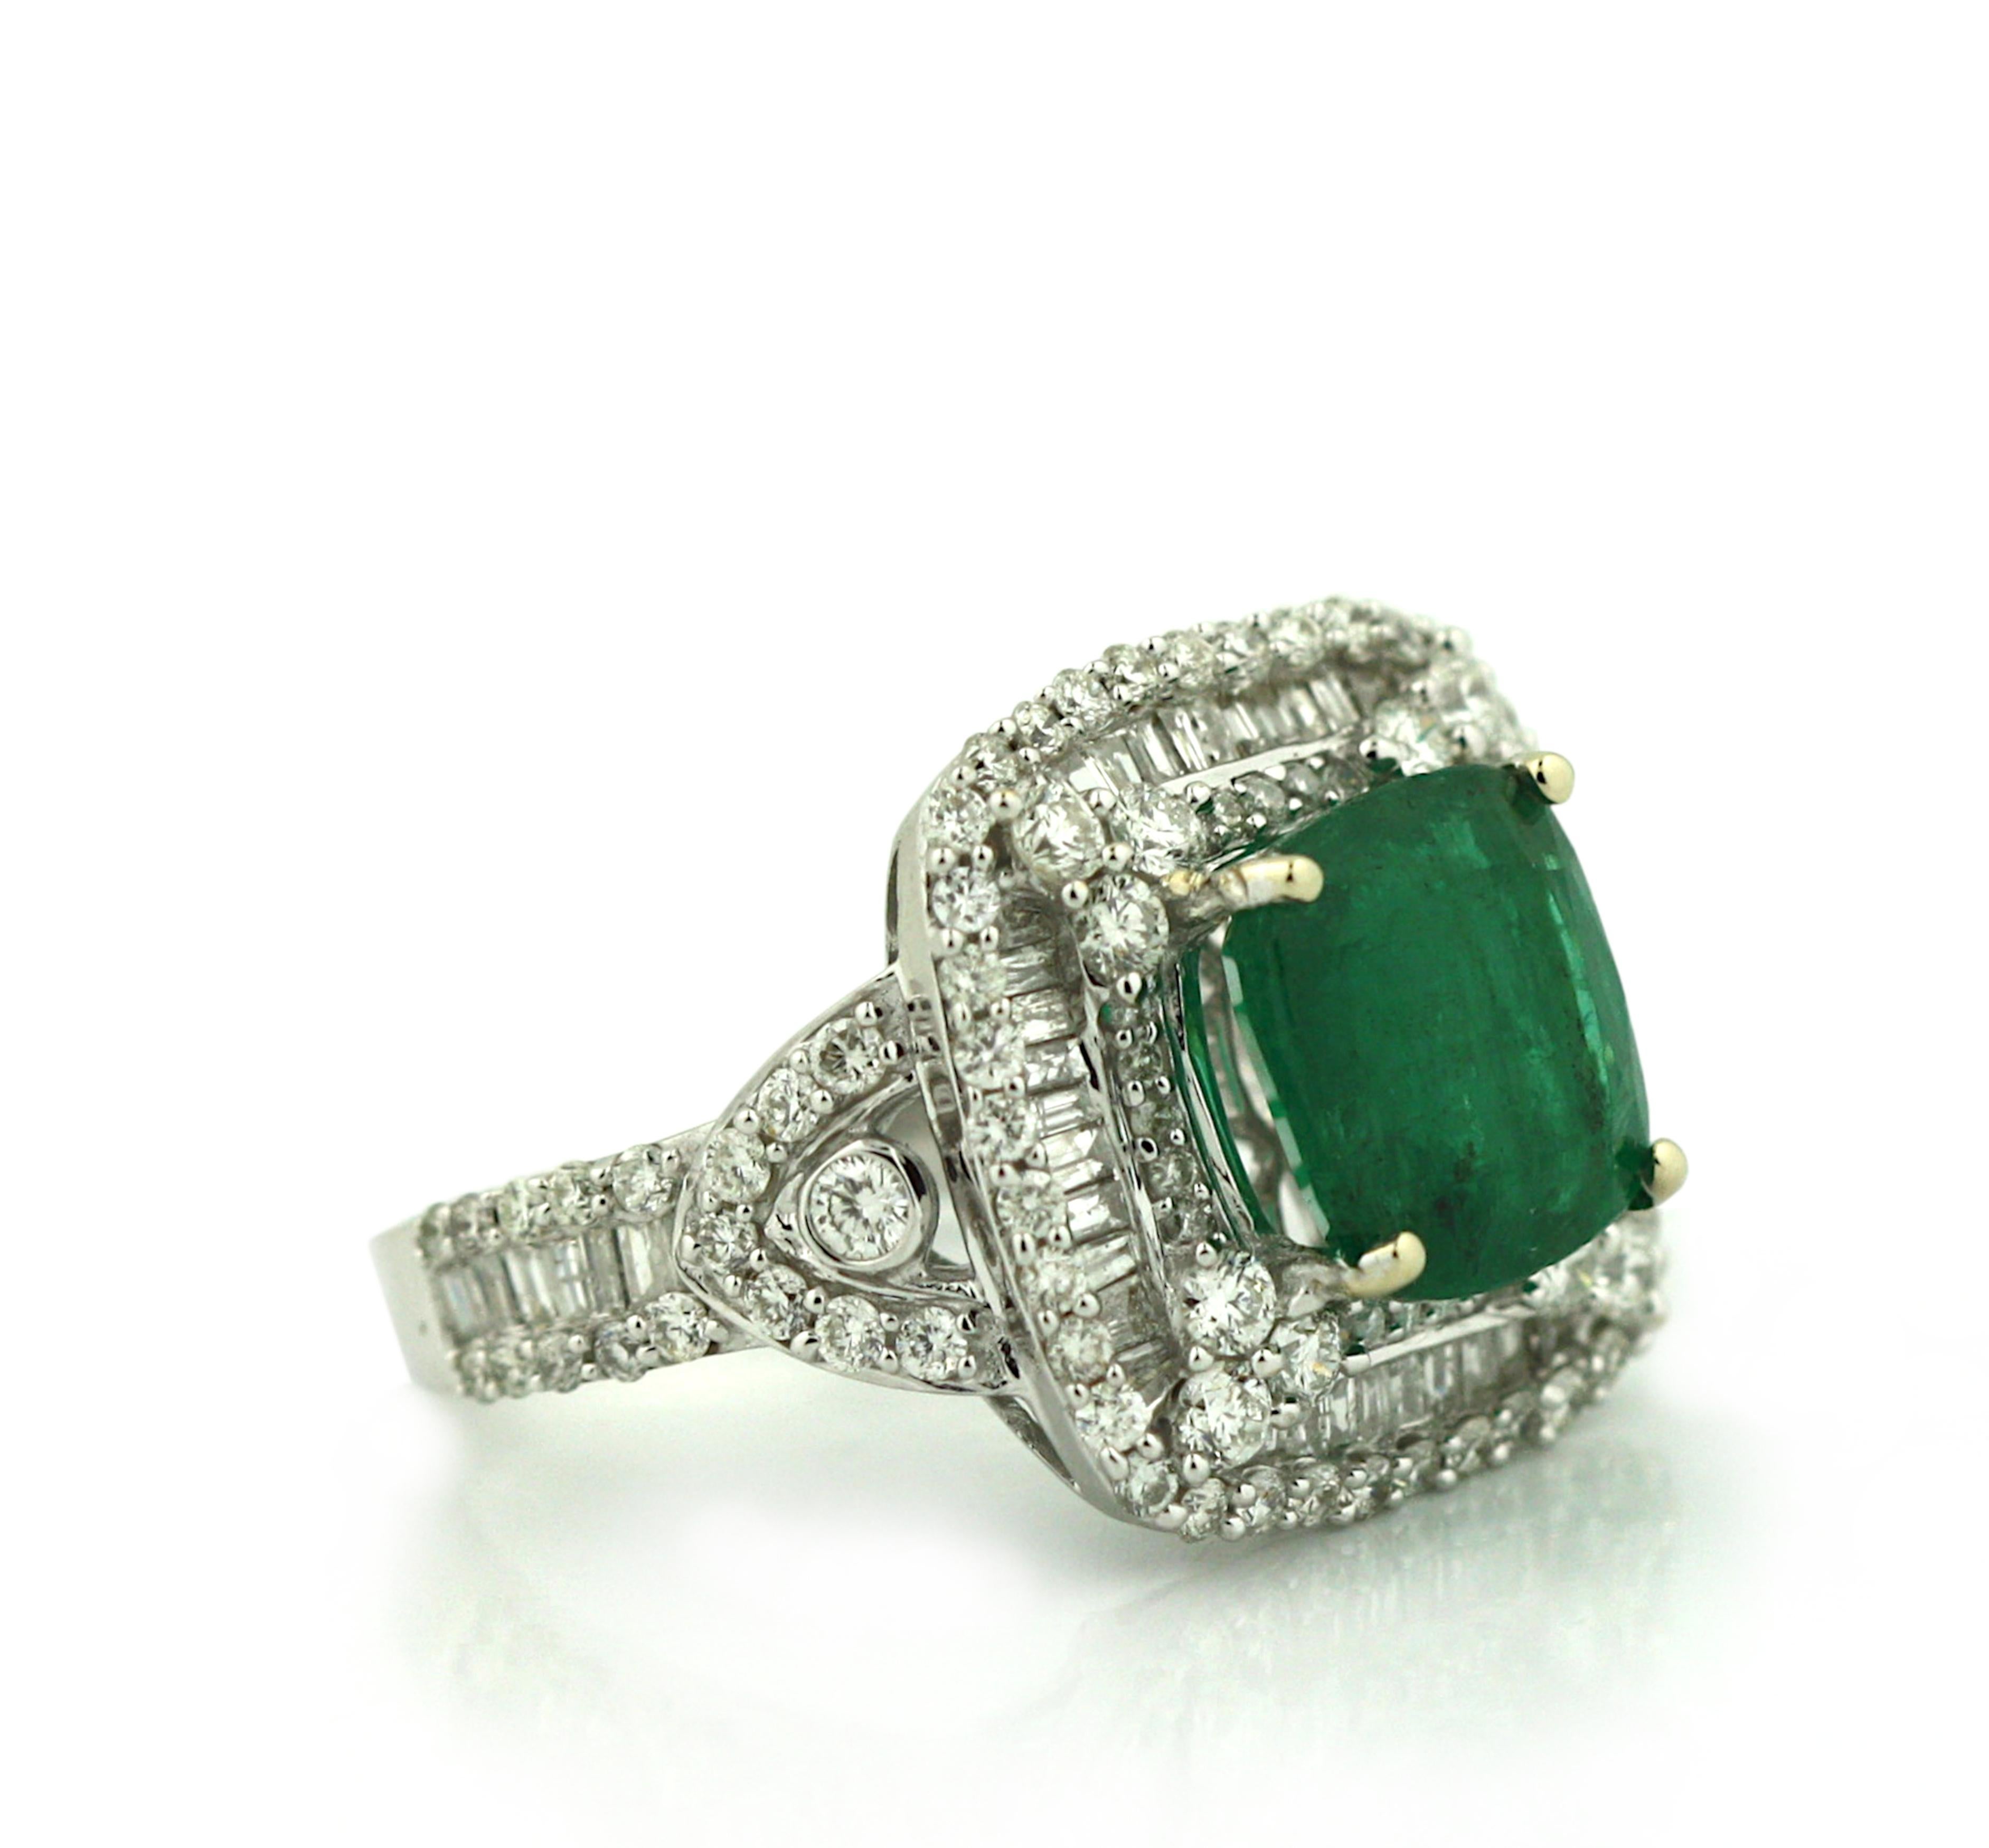 18K Gold Emerald and Diamond Ring 
Centered by a step-cut, octagonal natural Emerald 
Weighing 4.24 cts. 
Measuring 10.4 x 9.5 x 5.8 mm 
Within a surround of one hundred sixty baguette and round brilliant cut diamonds
weighing 2.28 cts. 
Total